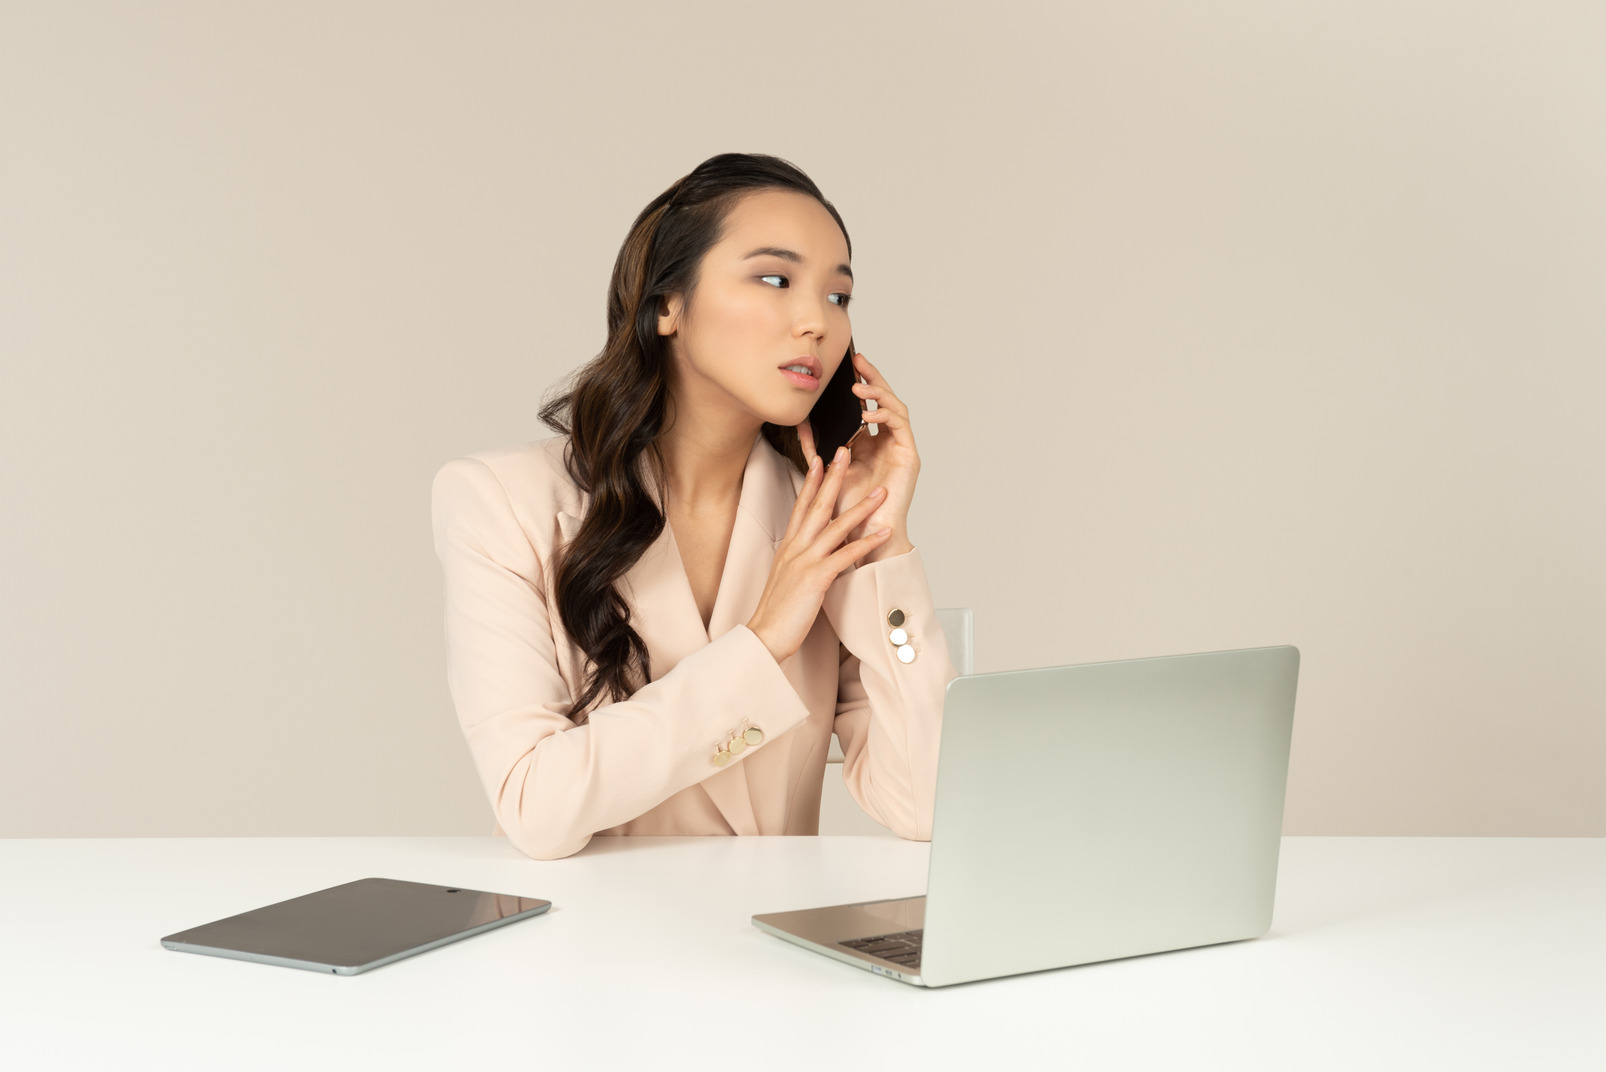 Asian female office employee listening carefully to phone call